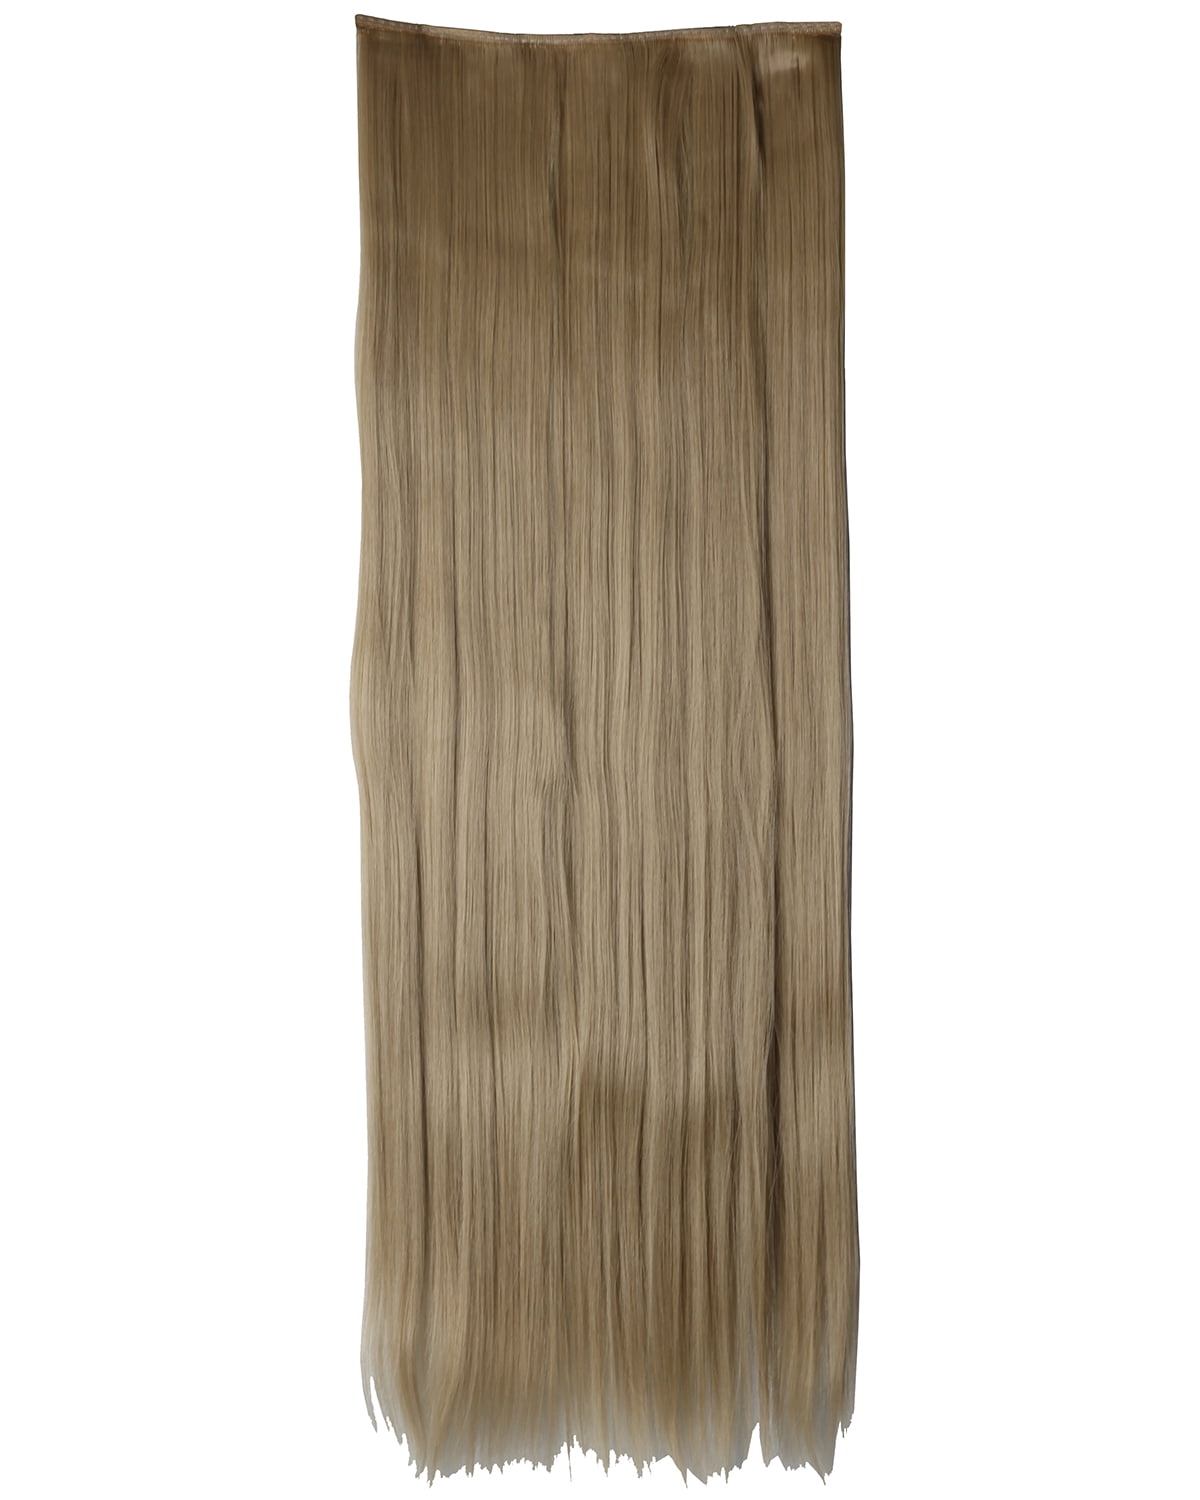 SAYFUT Trendy 26Long Straight 3/4 Full Head Clip in Synthetic